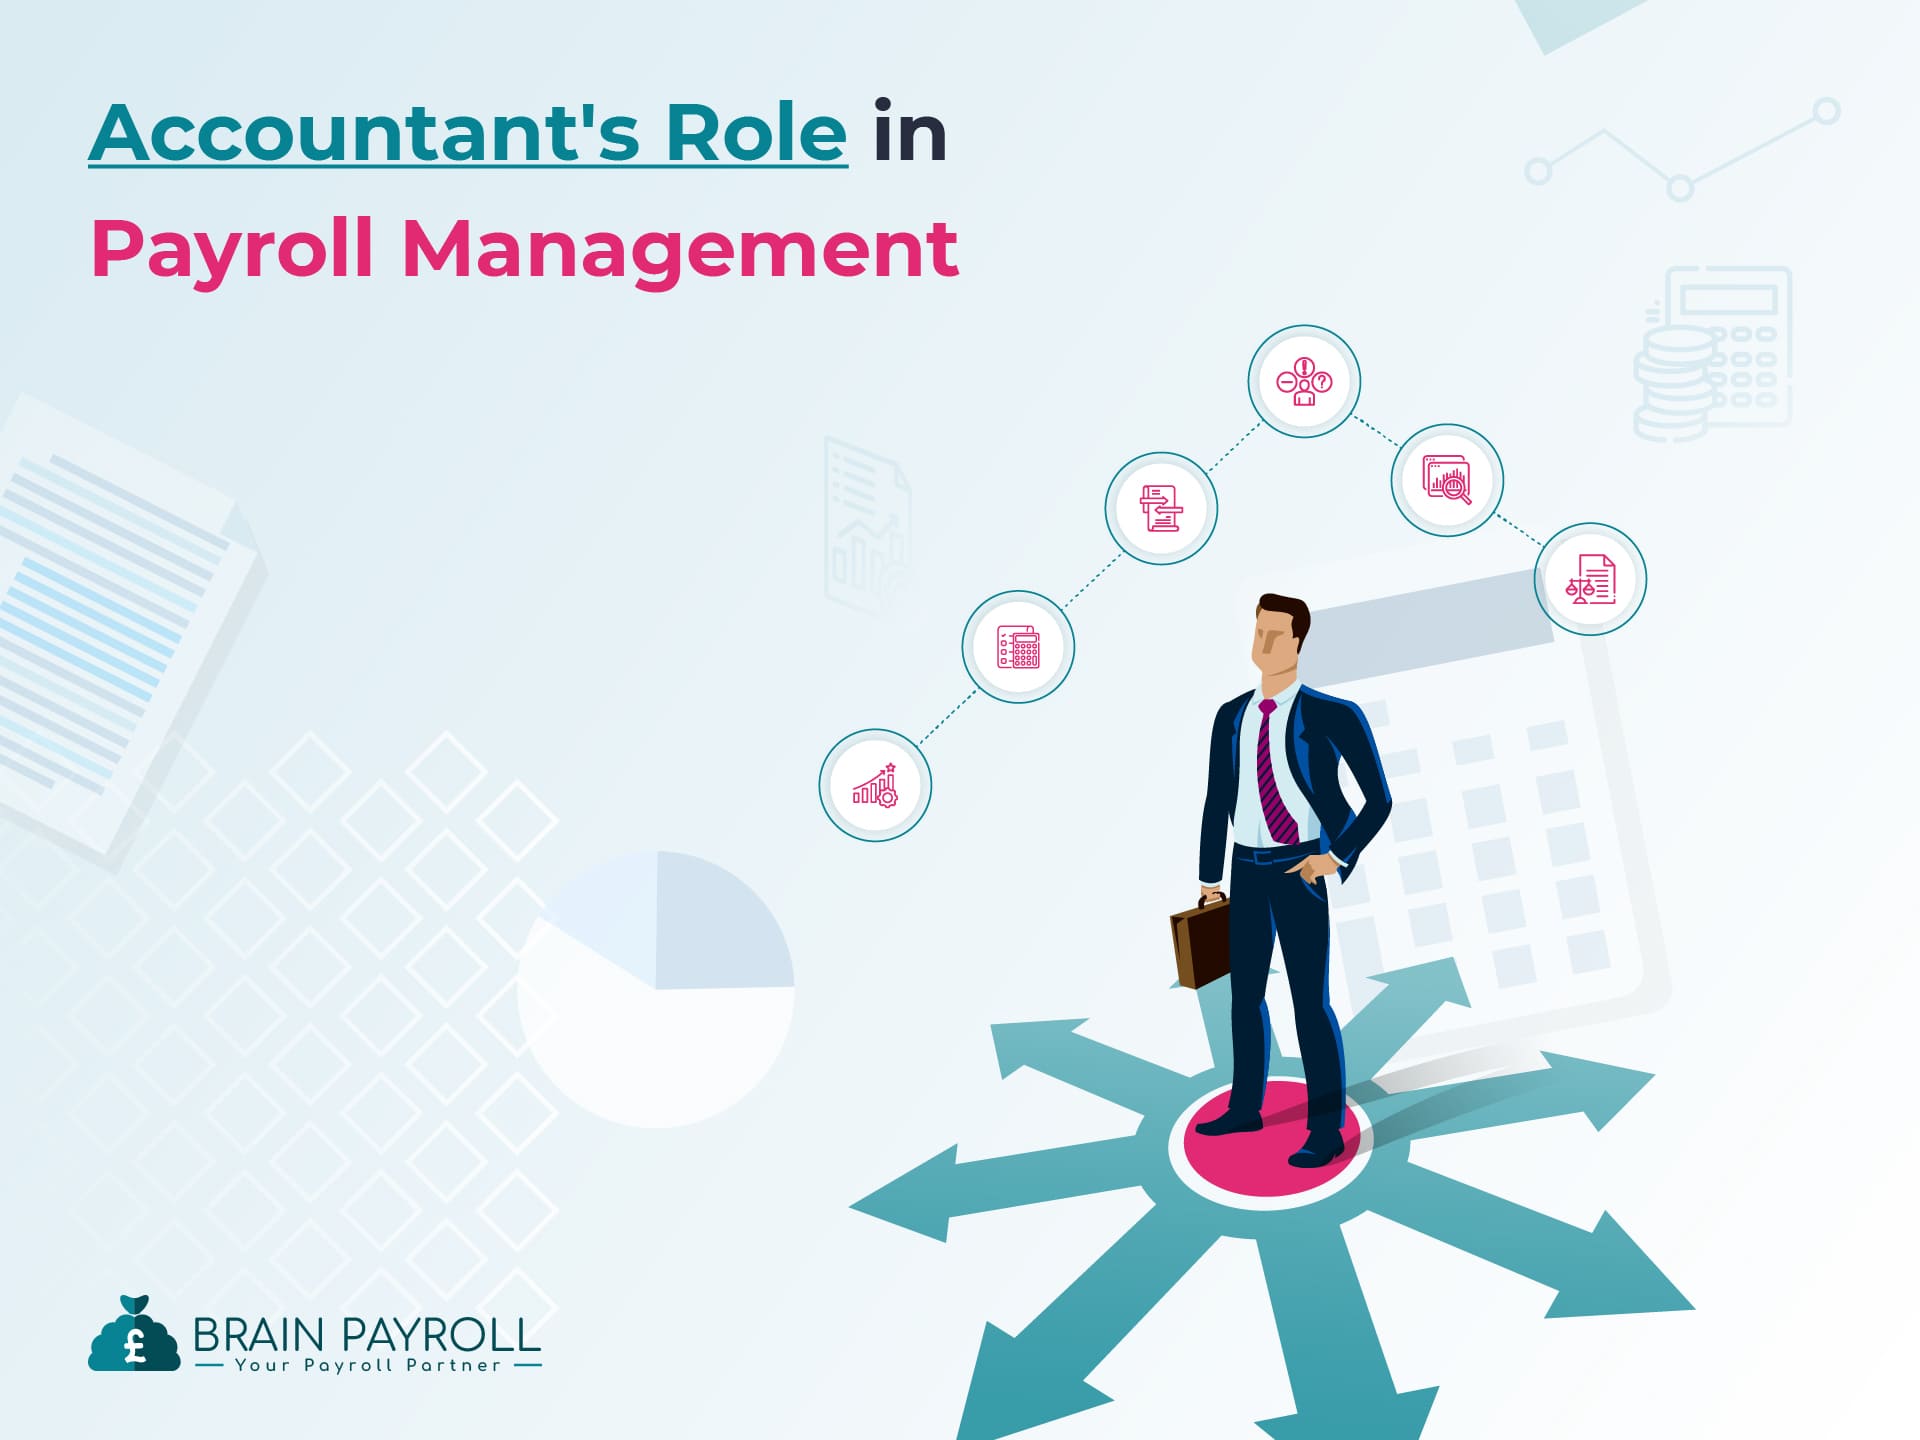 The Accountant's Role in Payroll Management